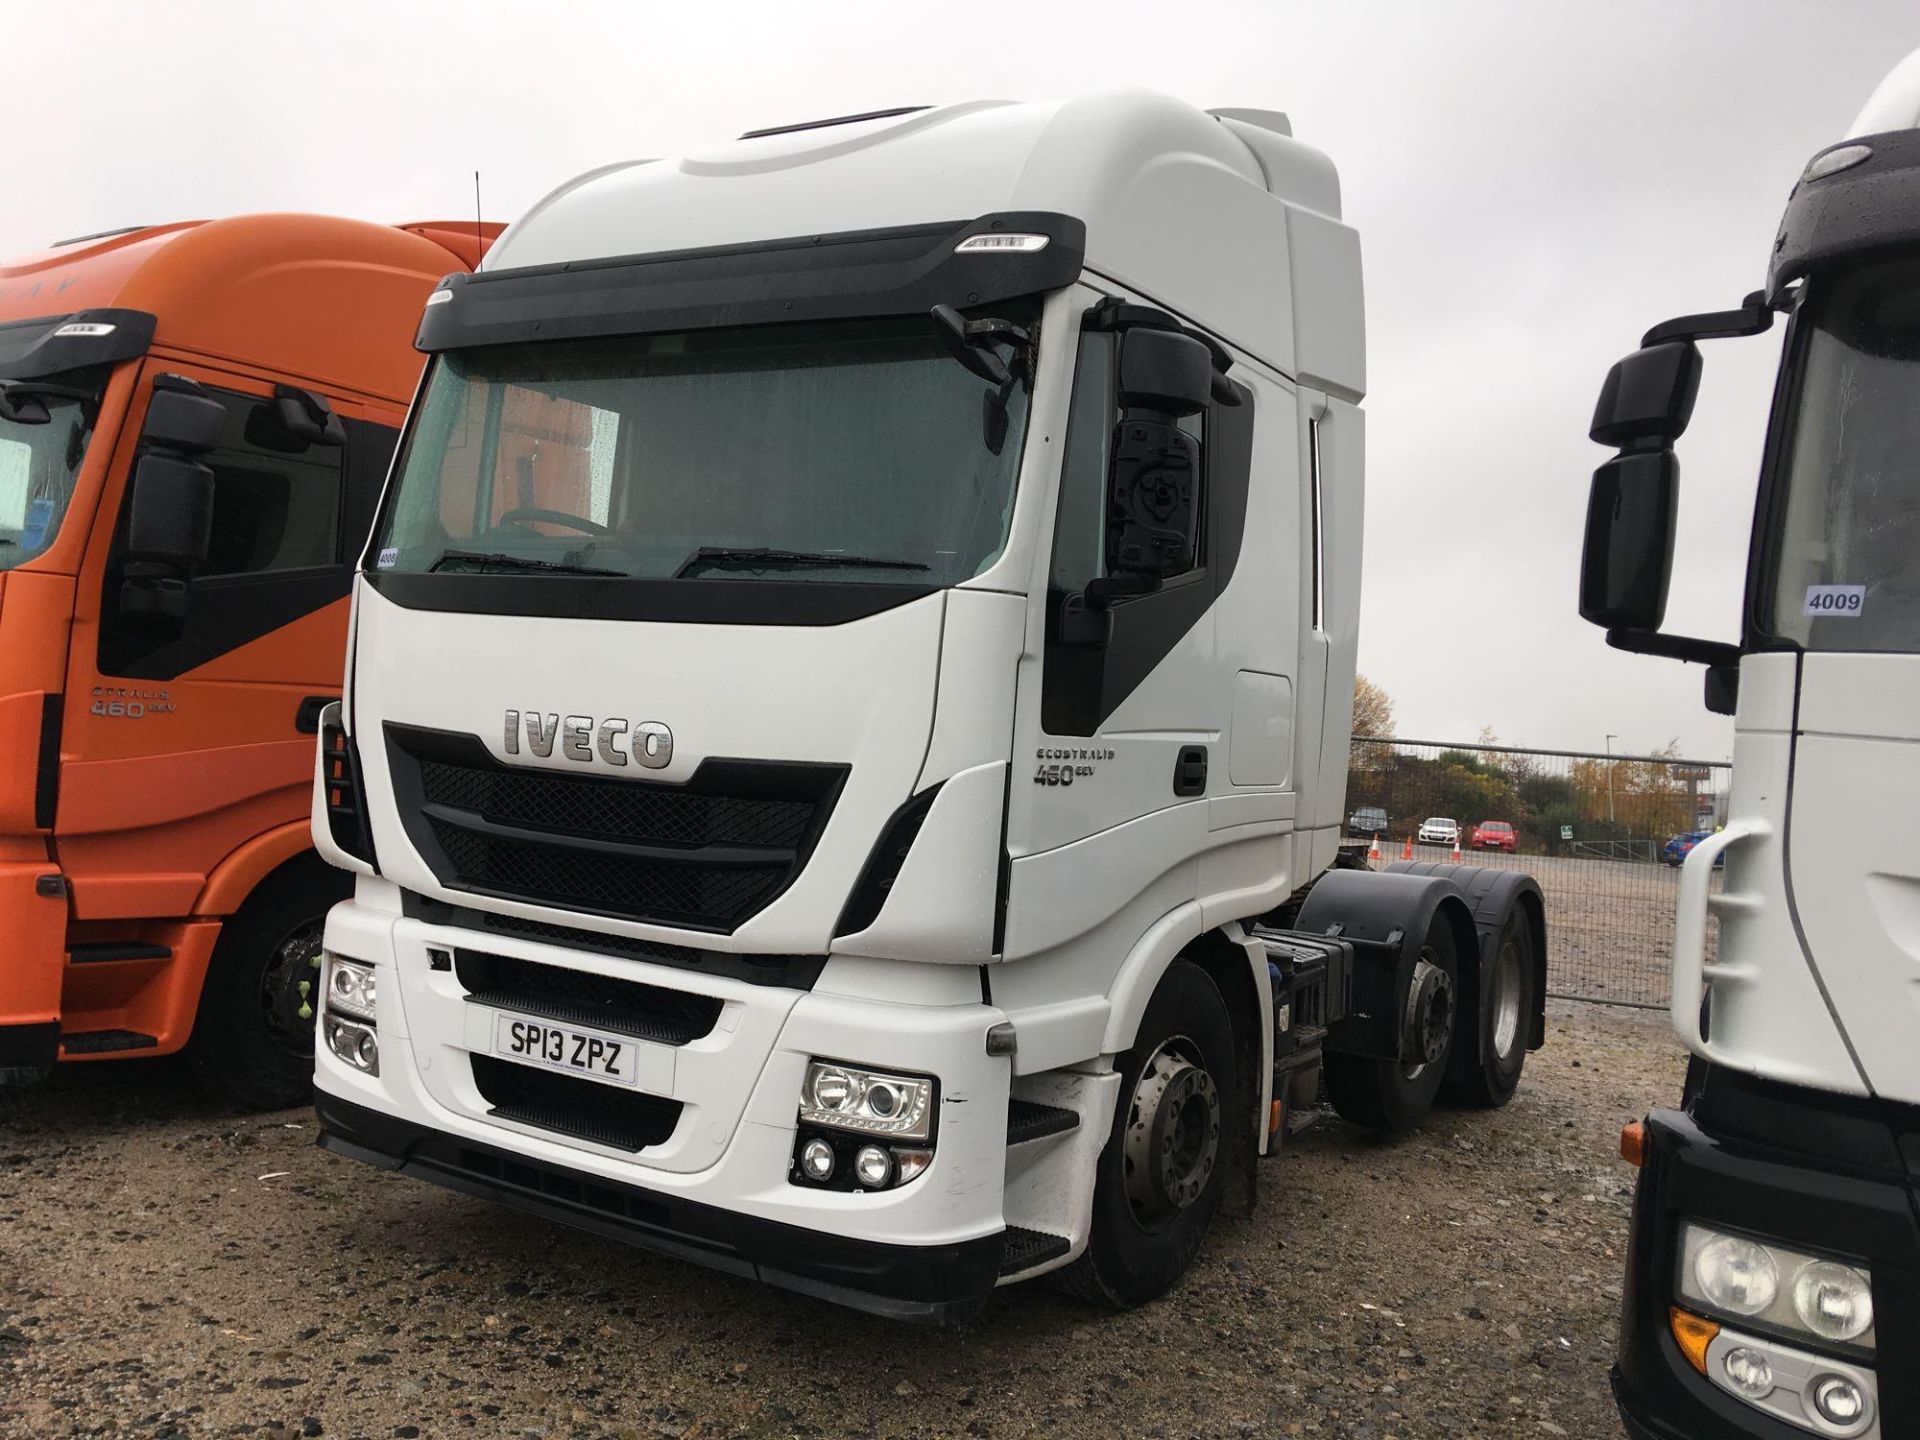 Iveco Stralis As440s46tx/p - 10308cc Truck - Image 2 of 4